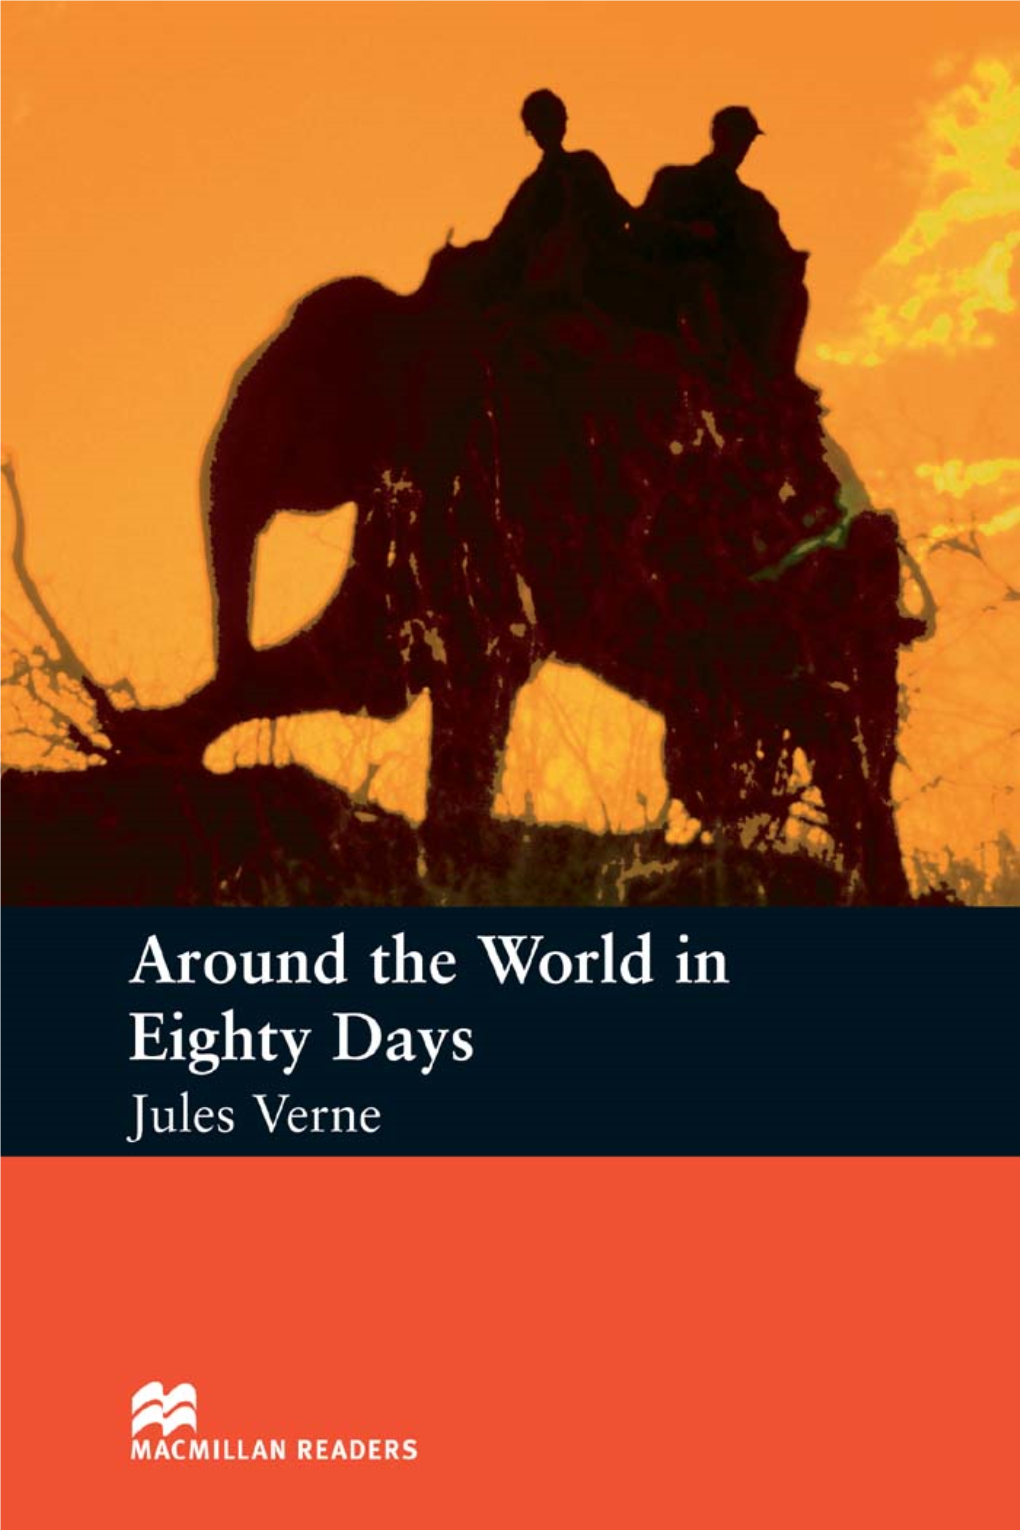 Around the World in Eighty Days by Jules Verne Was Retold by María José Lobo and Pepita Subirà for Macmillan Readers